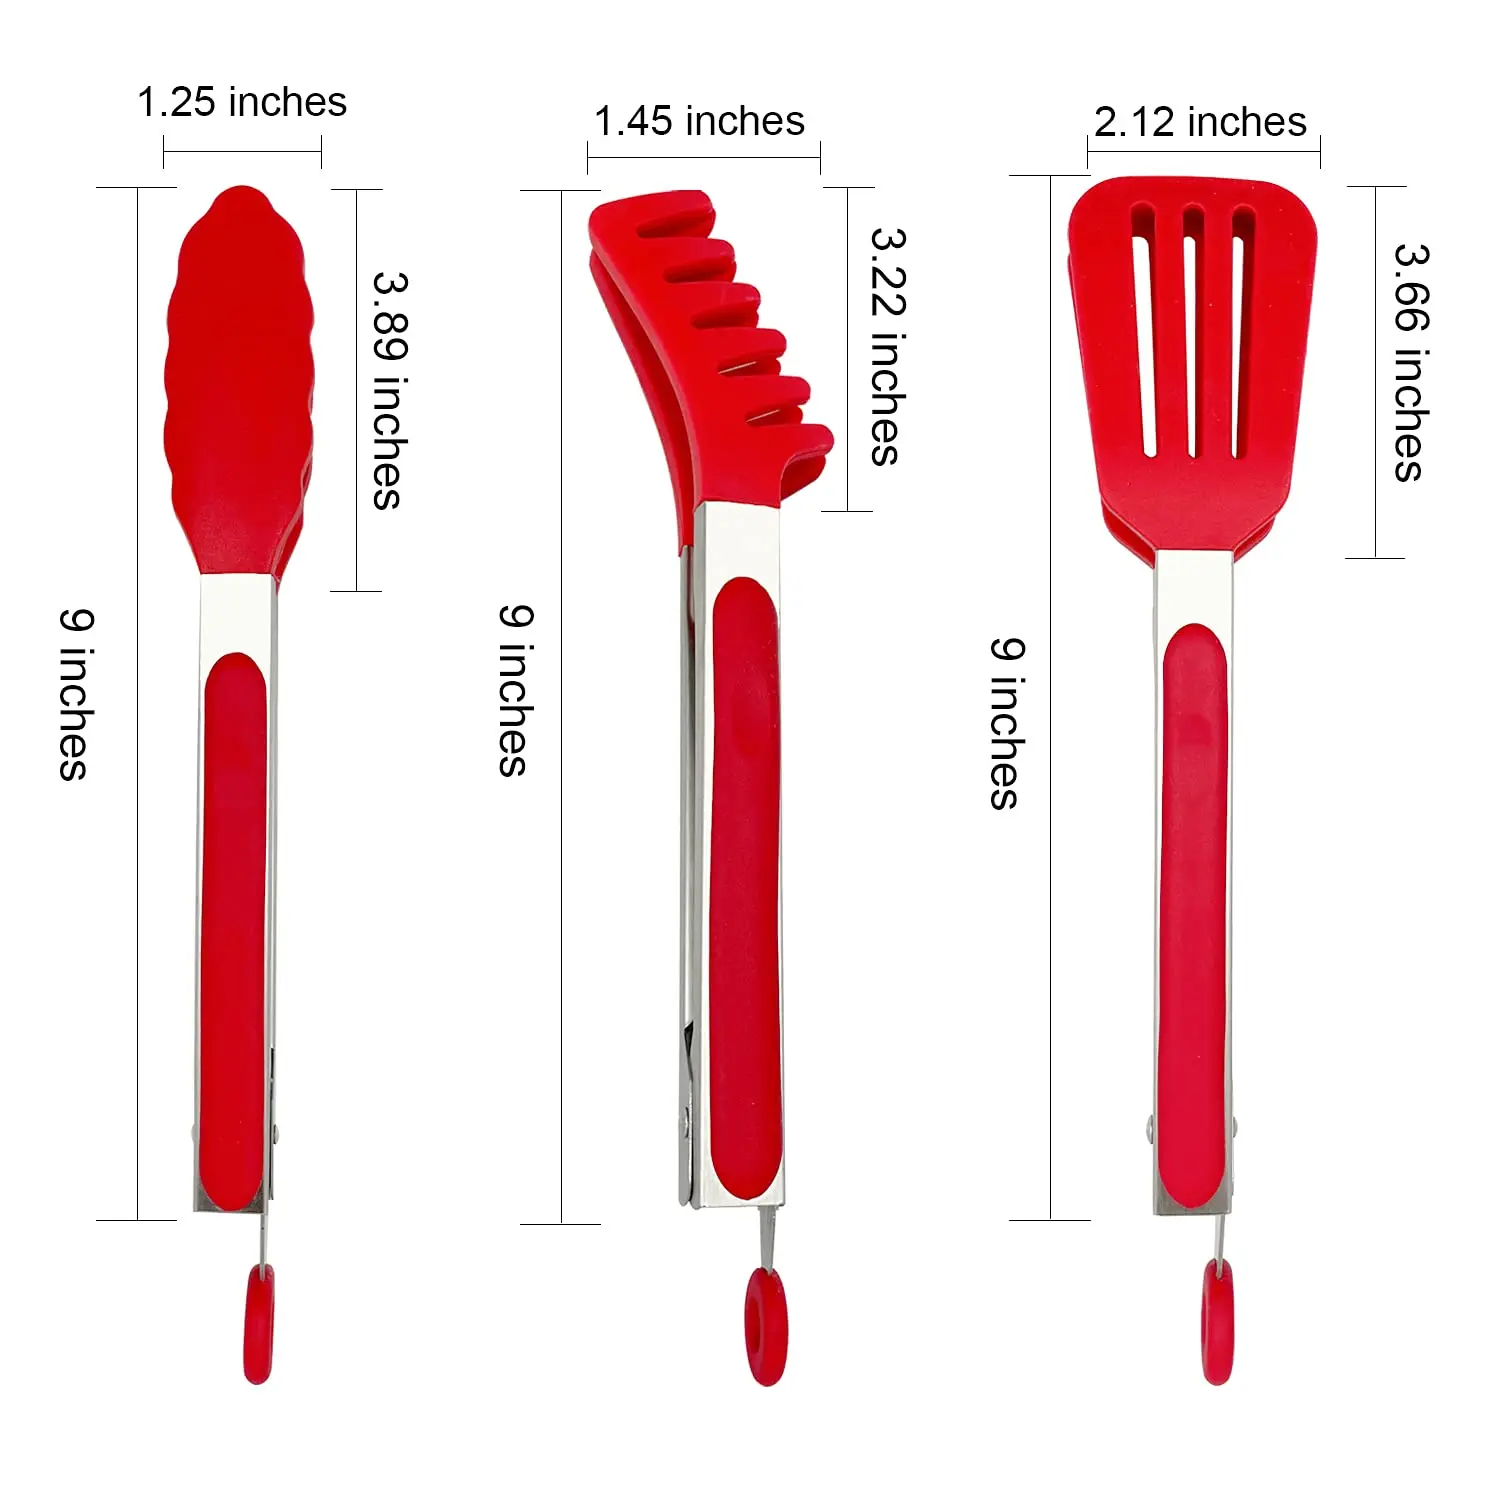 Fancy Design High Quality 9 inch Non-Stick Silicone BBQ Cooking Tongs Grilling Salad Tongs